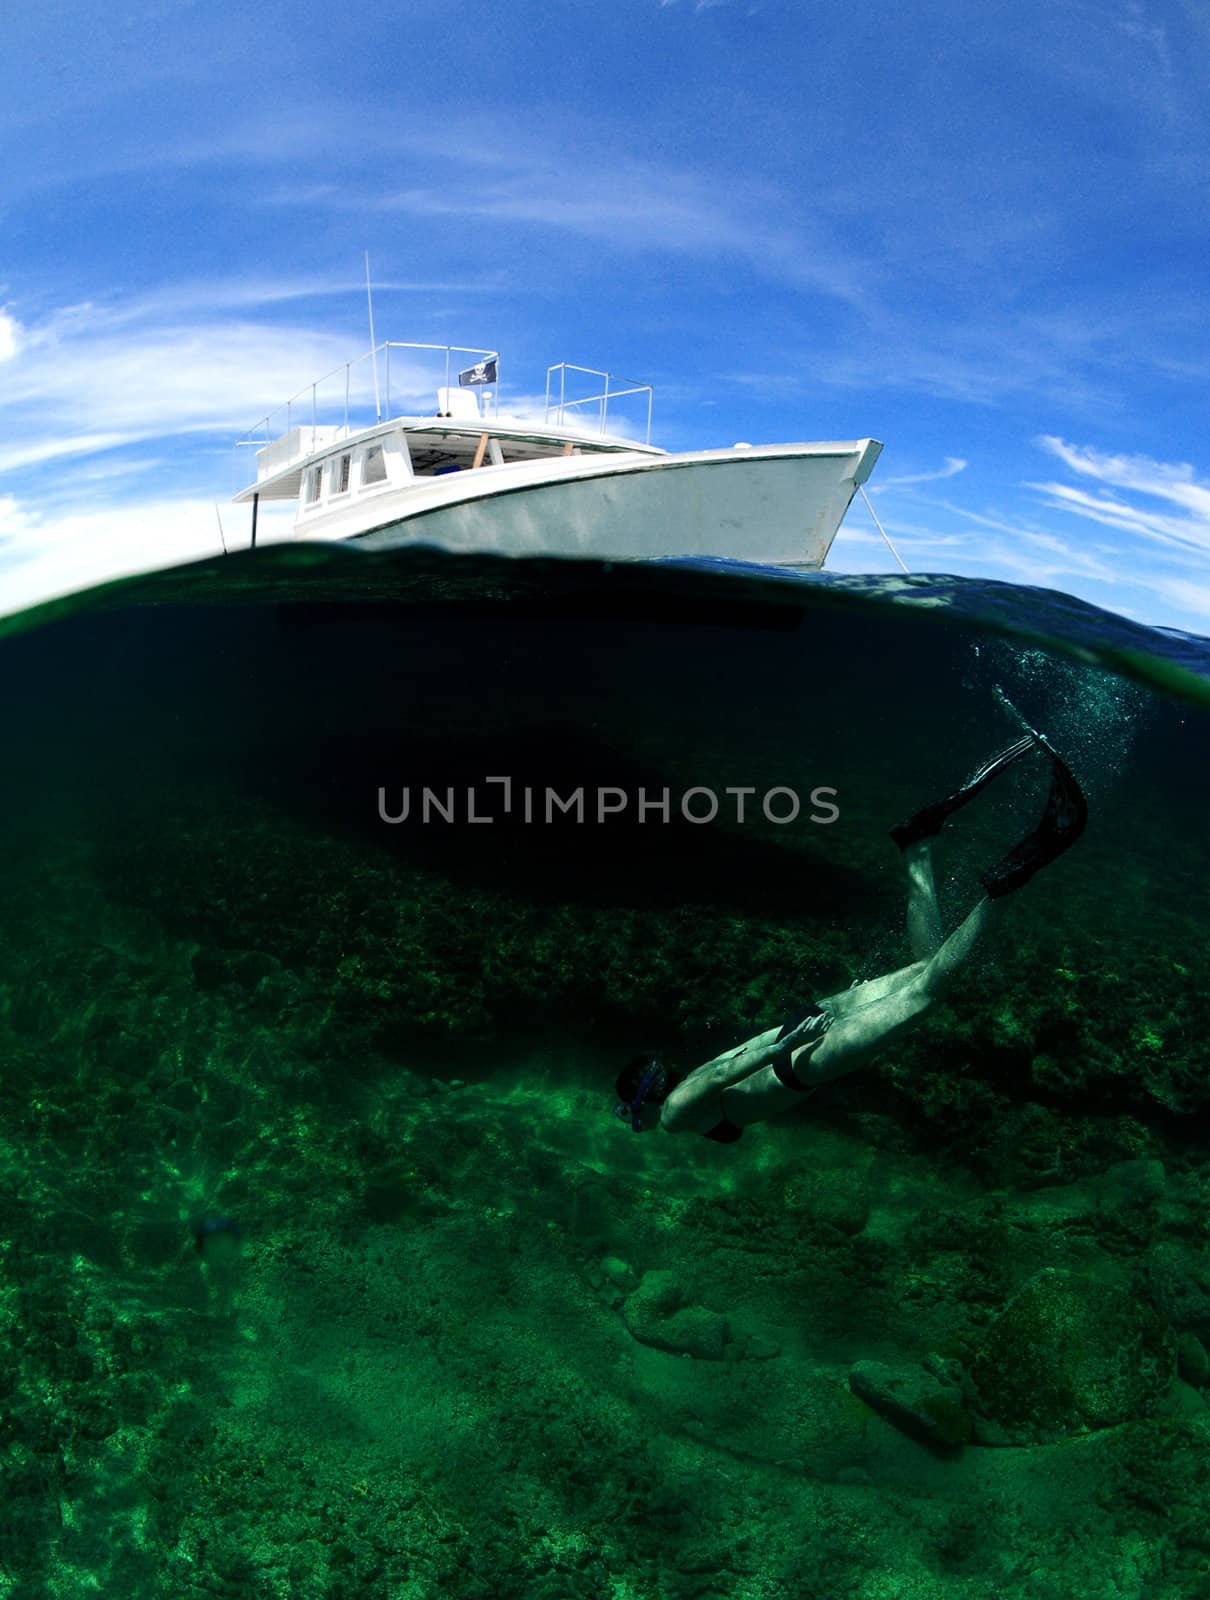 Underwater view of woman snorkeling with an above ground view of a white boat against a blue sky